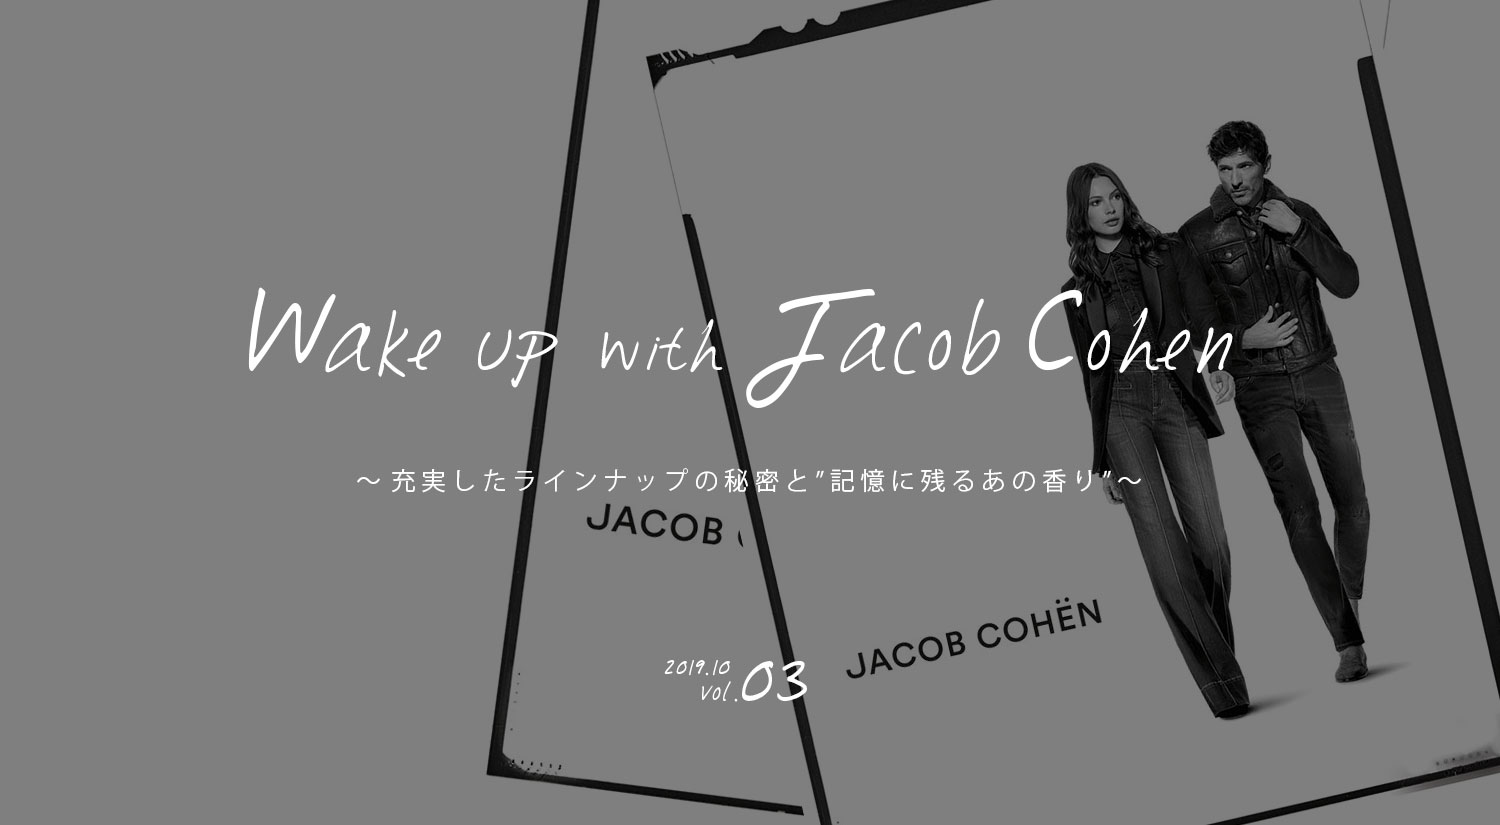 Wake up with Jacob cohen Vol.03